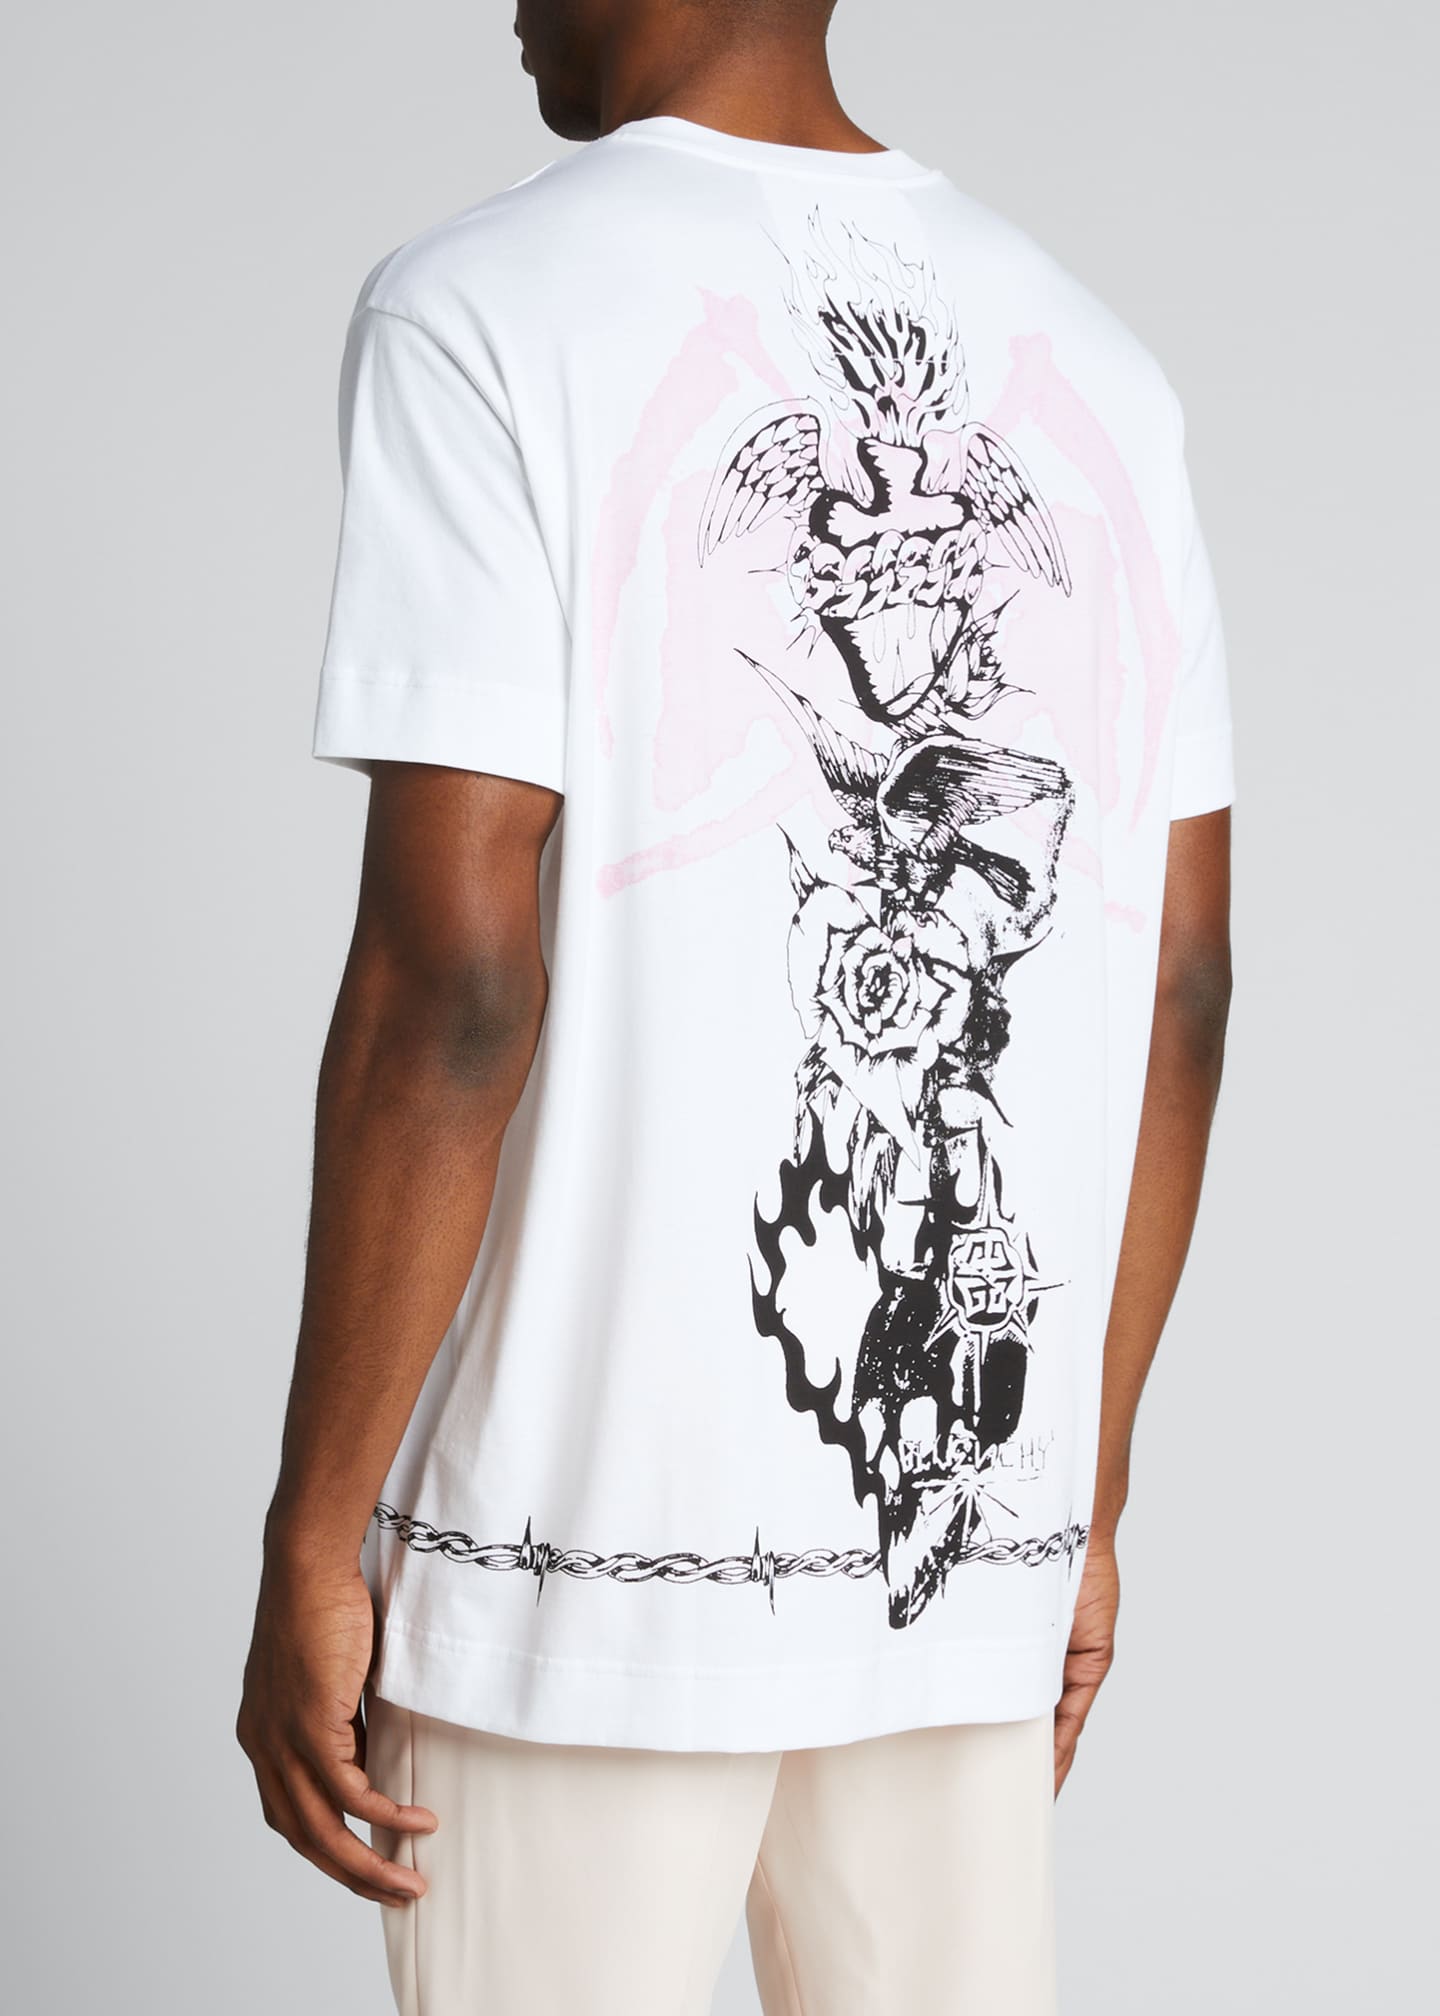 Givenchy Men's Oversized Graphic T-Shirt